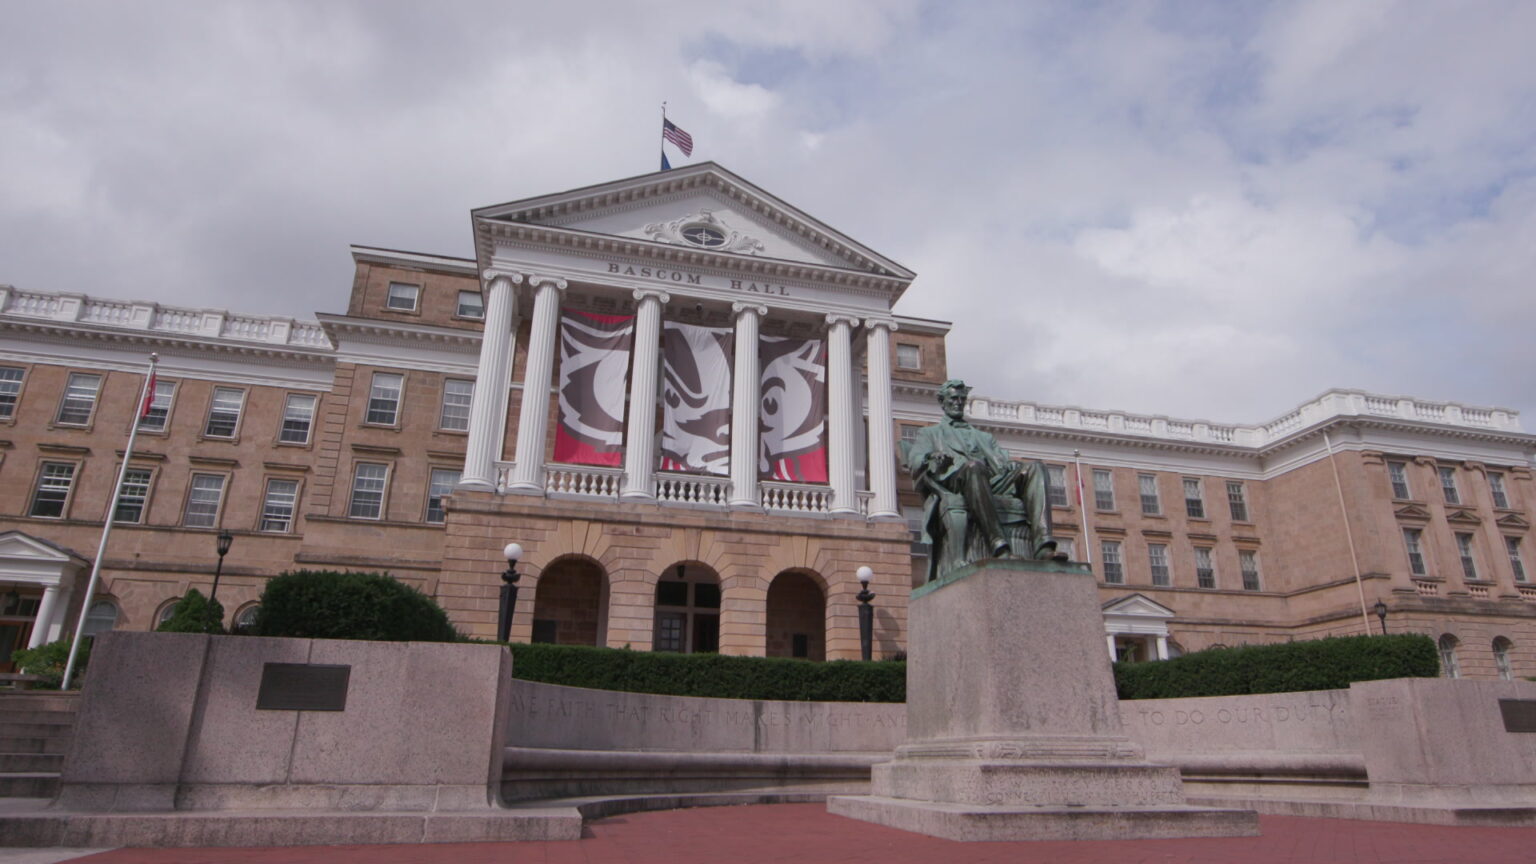 Bascom hall with the Abe Lincoln statue to the right.